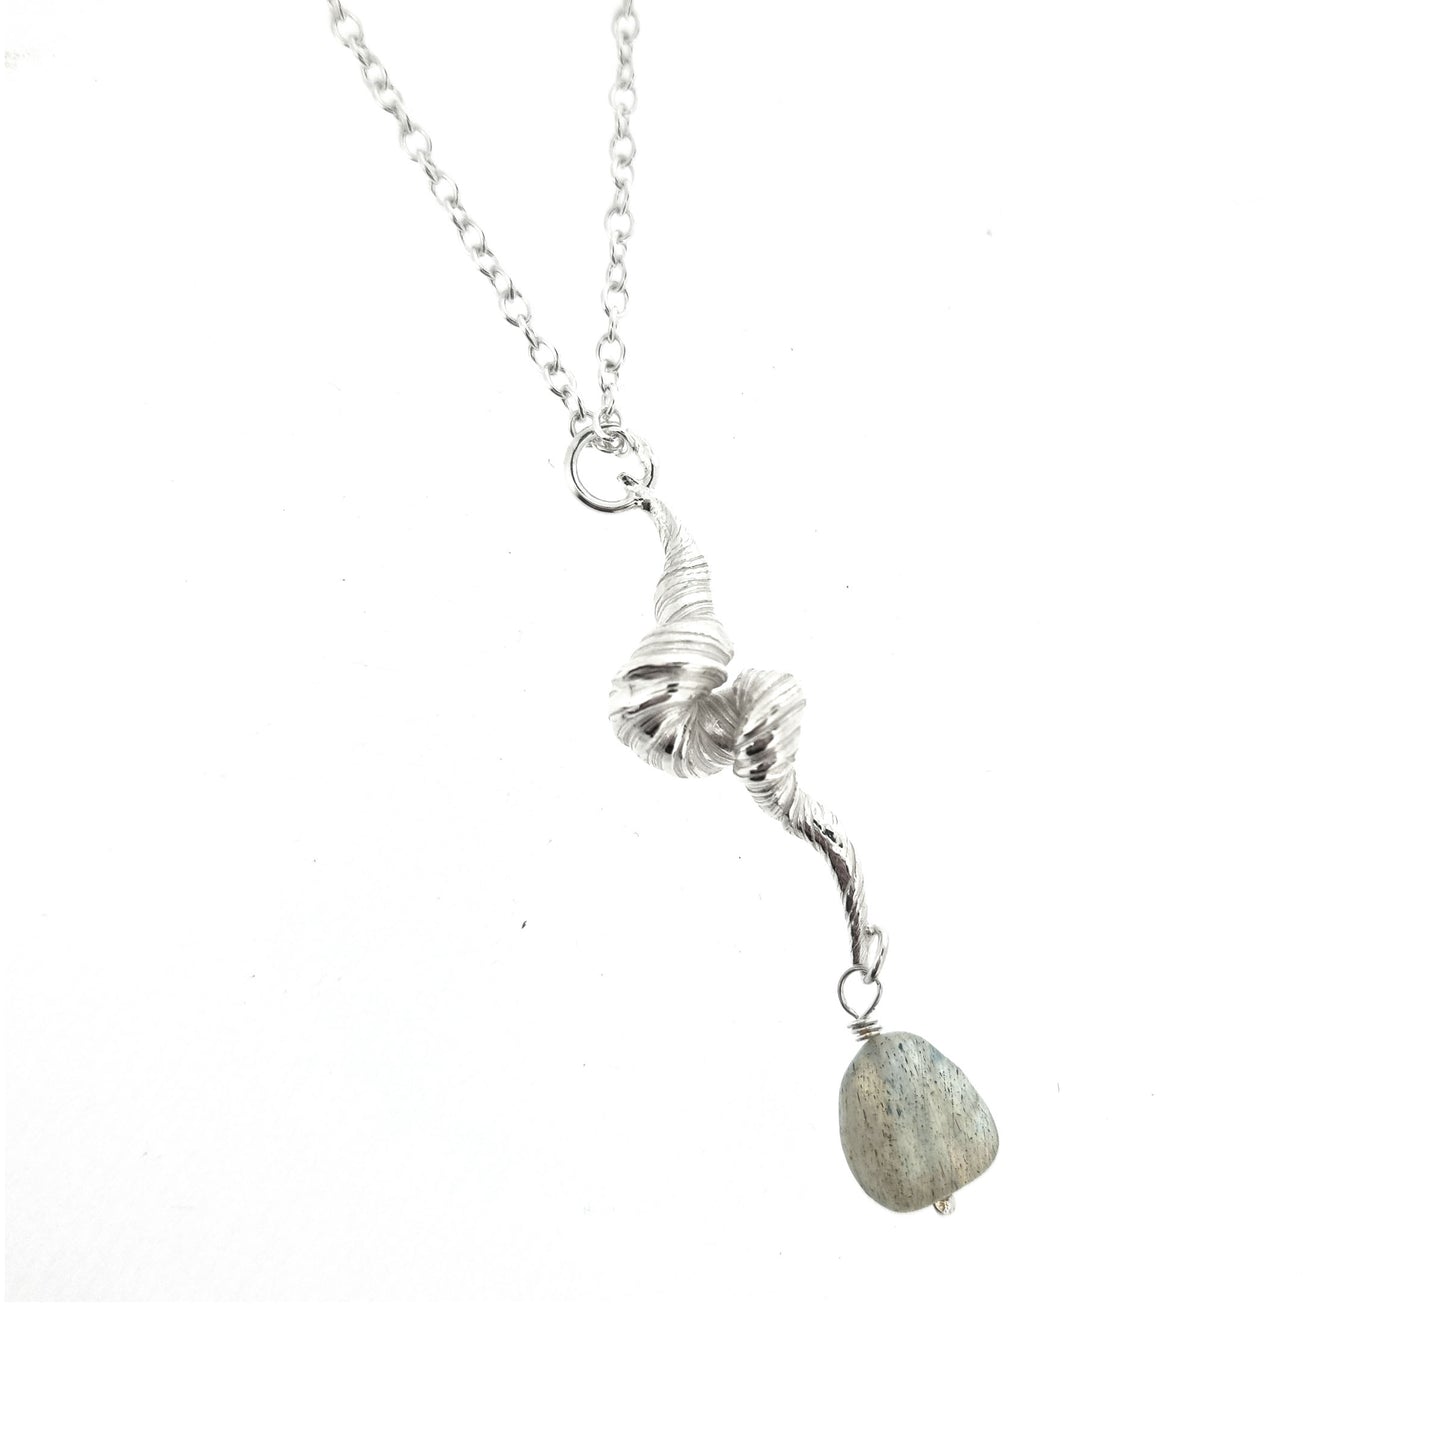 Silver twisted pendant with striations and a labradorite gemstone bead, on a silver chain.